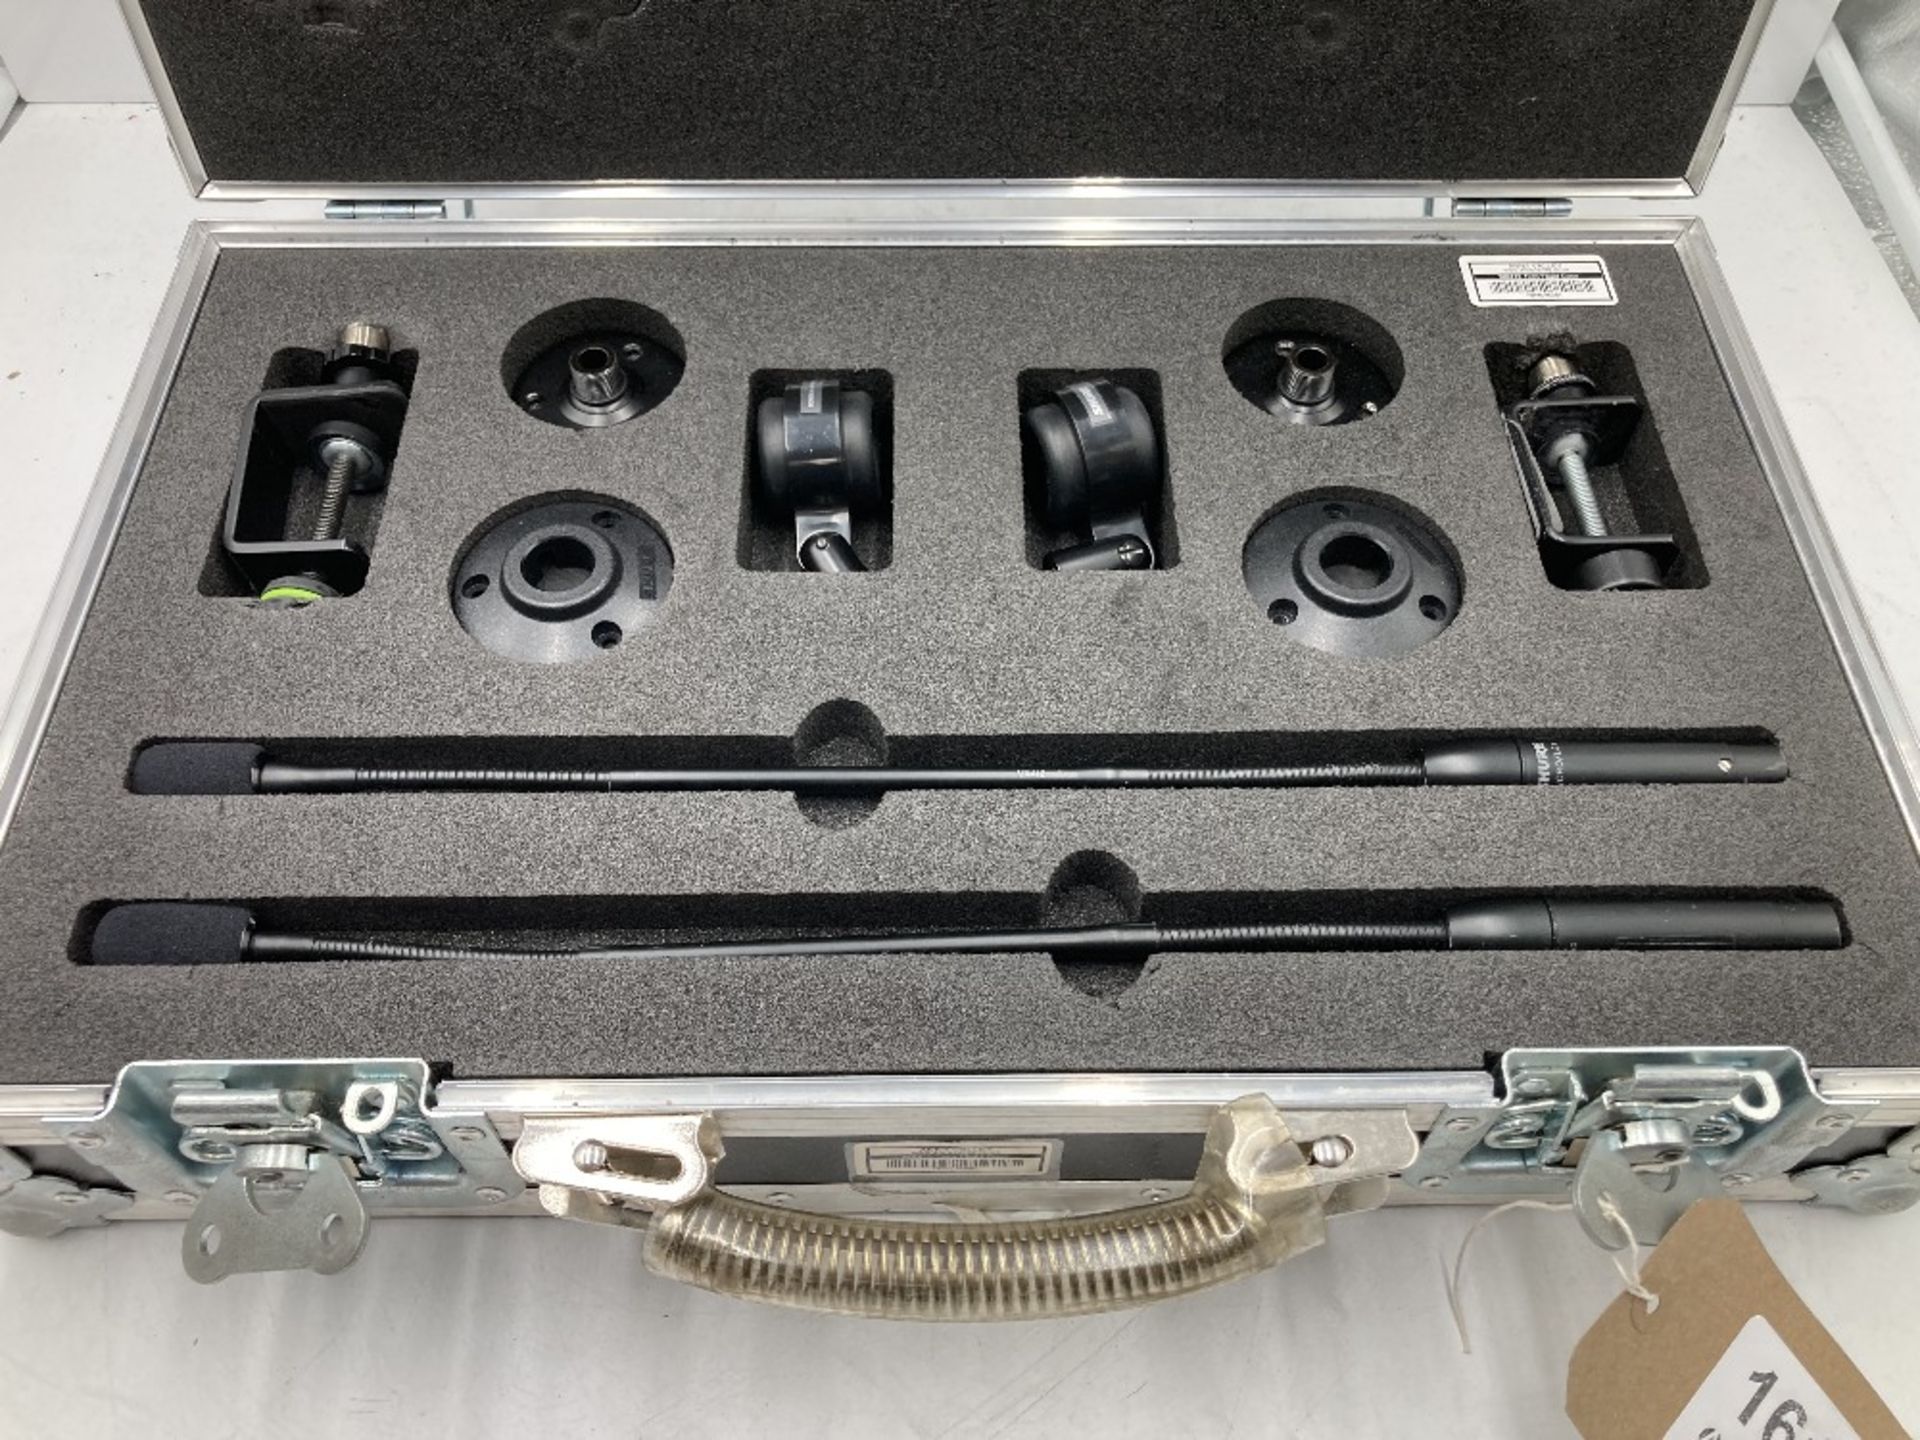 Shure MX412 Lecturn Kit & Heavy Duty Case - Image 5 of 6